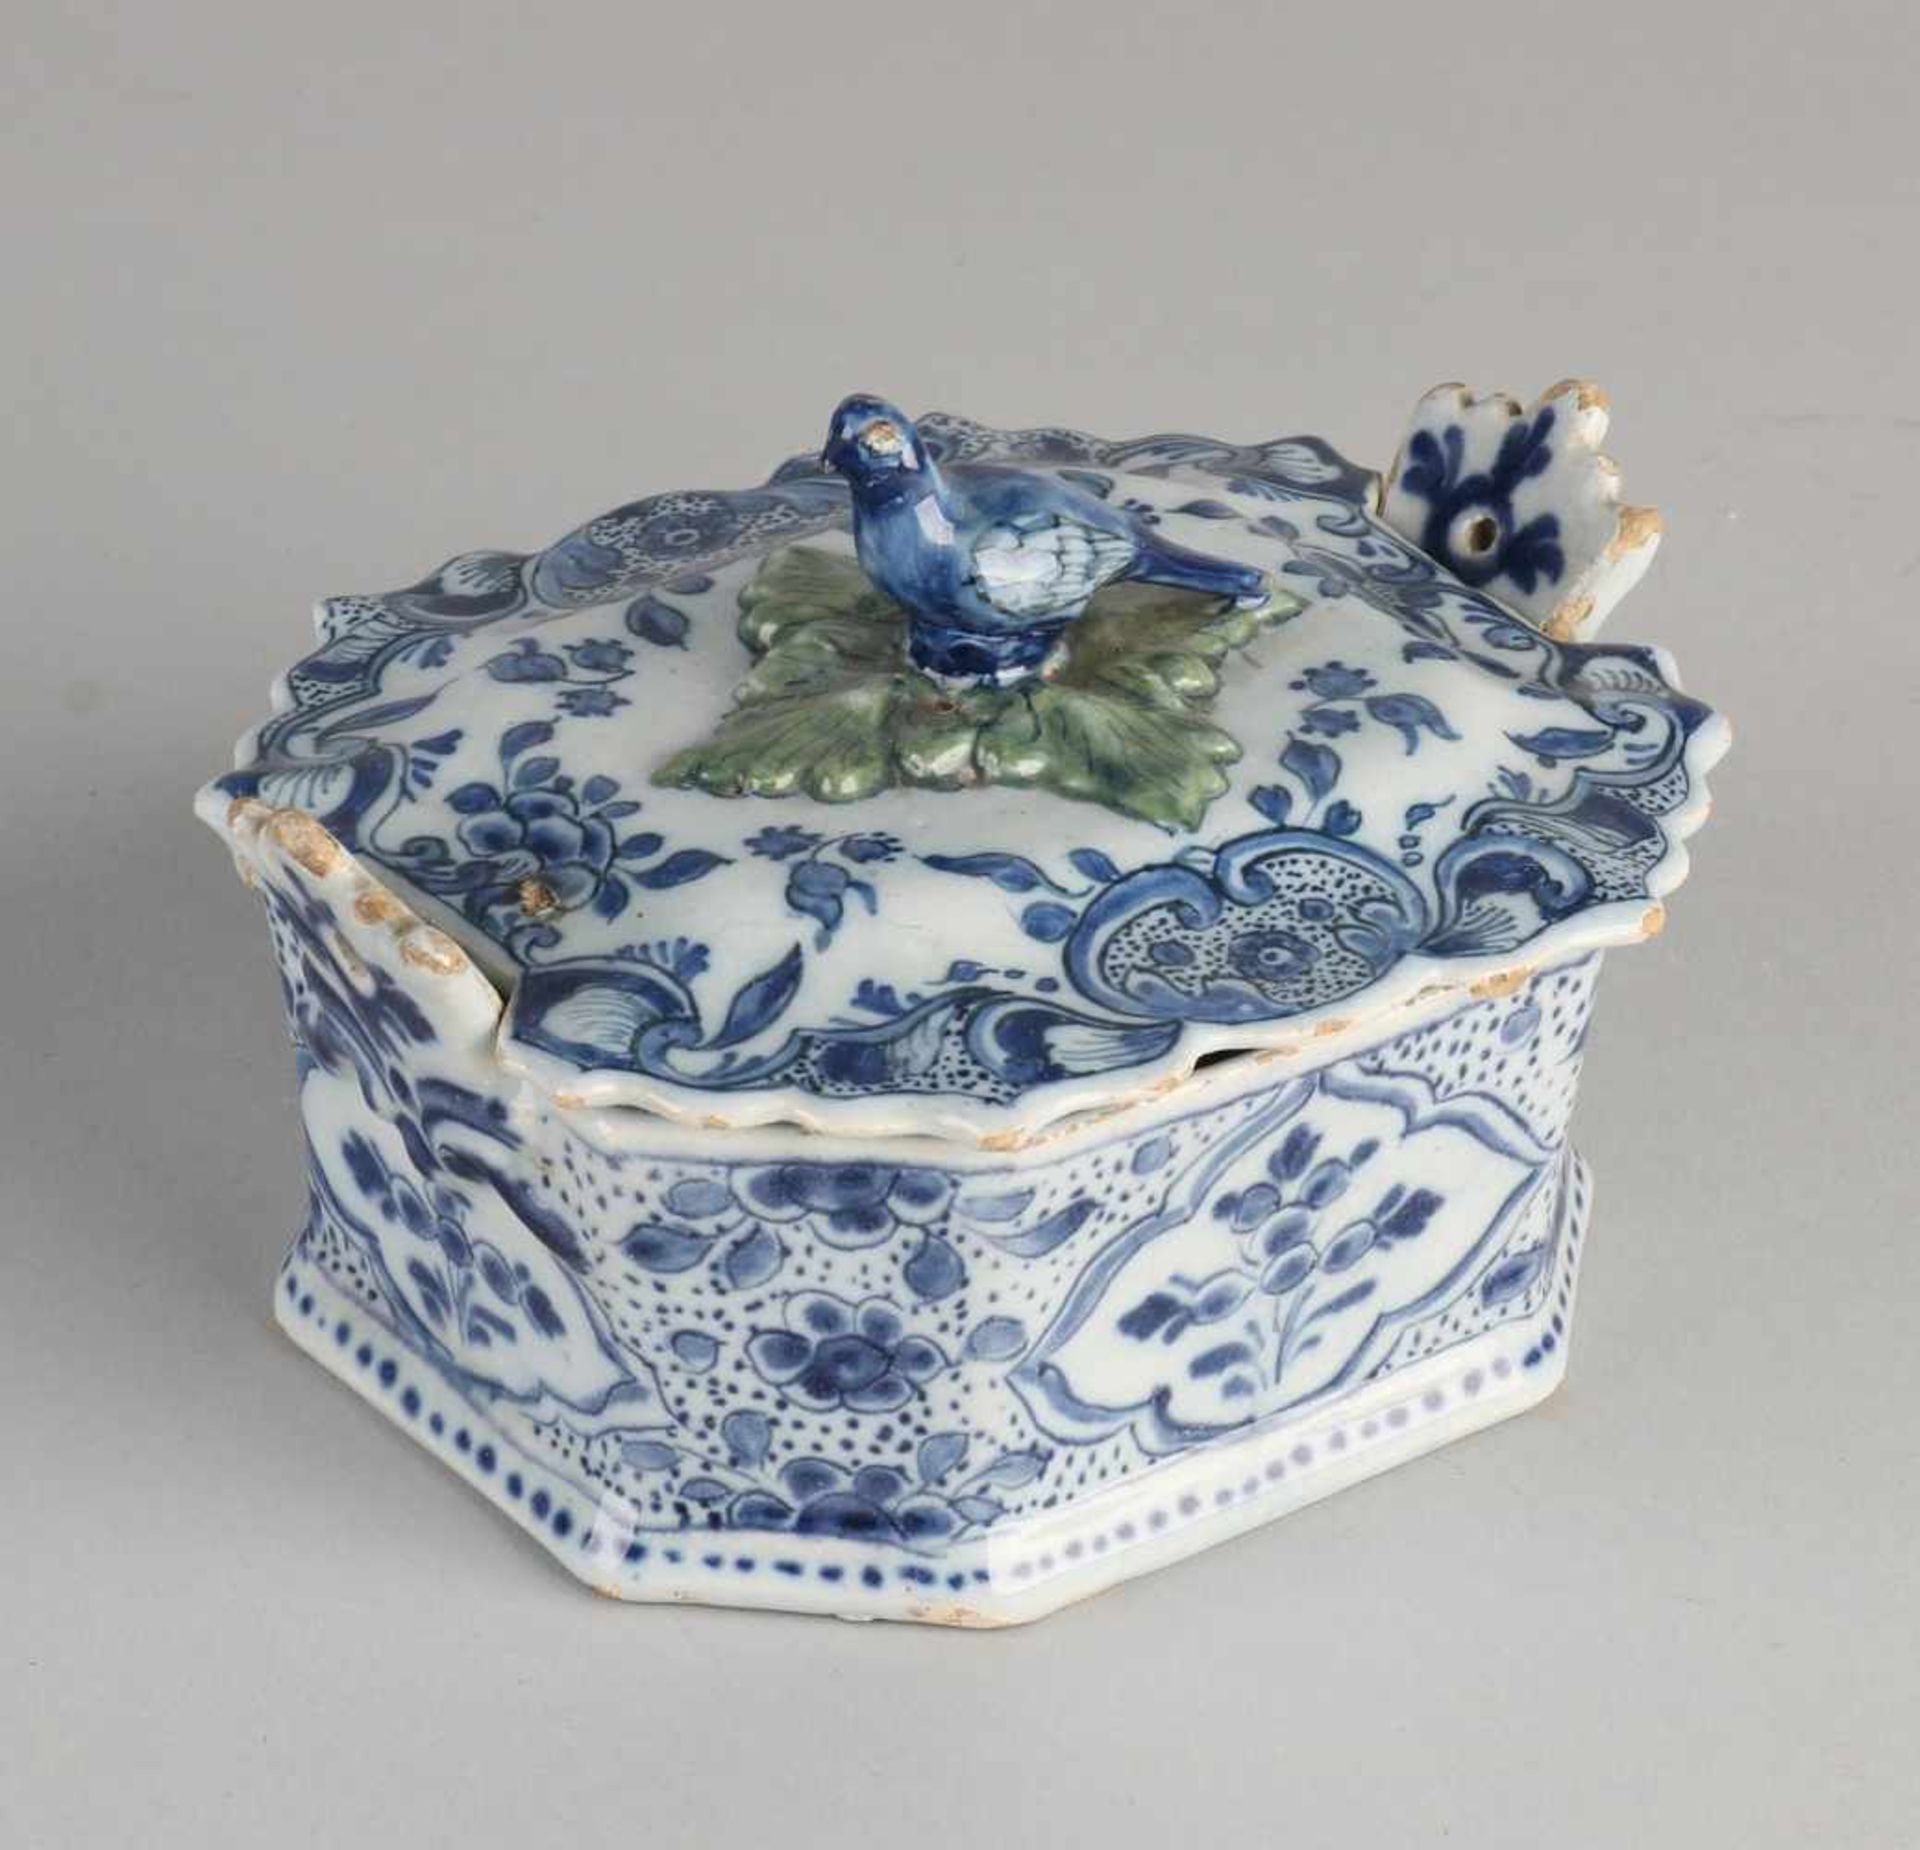 Rare 18th century Delft Fayence dekselbak with floral / dove decor. Marked with the pot. P. Parea